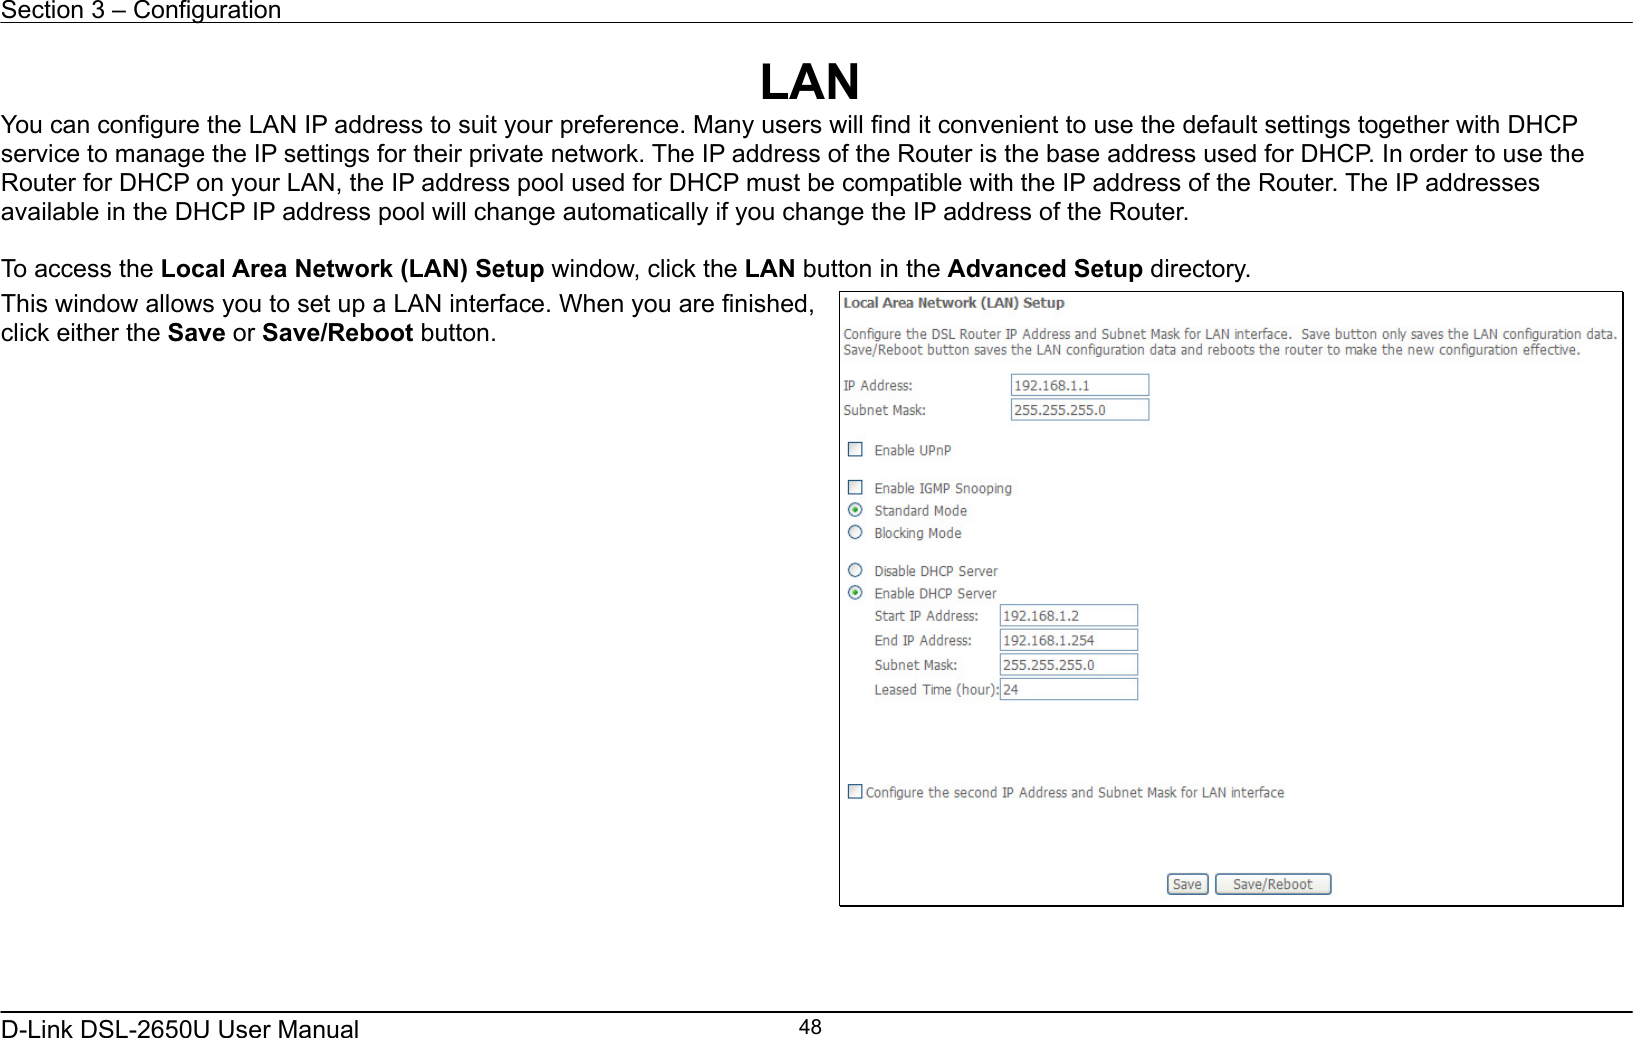 Section 3 – Configuration   D-Link DSL-2650U User Manual    48LAN You can configure the LAN IP address to suit your preference. Many users will find it convenient to use the default settings together with DHCP service to manage the IP settings for their private network. The IP address of the Router is the base address used for DHCP. In order to use the Router for DHCP on your LAN, the IP address pool used for DHCP must be compatible with the IP address of the Router. The IP addresses available in the DHCP IP address pool will change automatically if you change the IP address of the Router.      To access the Local Area Network (LAN) Setup window, click the LAN button in the Advanced Setup directory. This window allows you to set up a LAN interface. When you are finished, click either the Save or Save/Reboot button.       